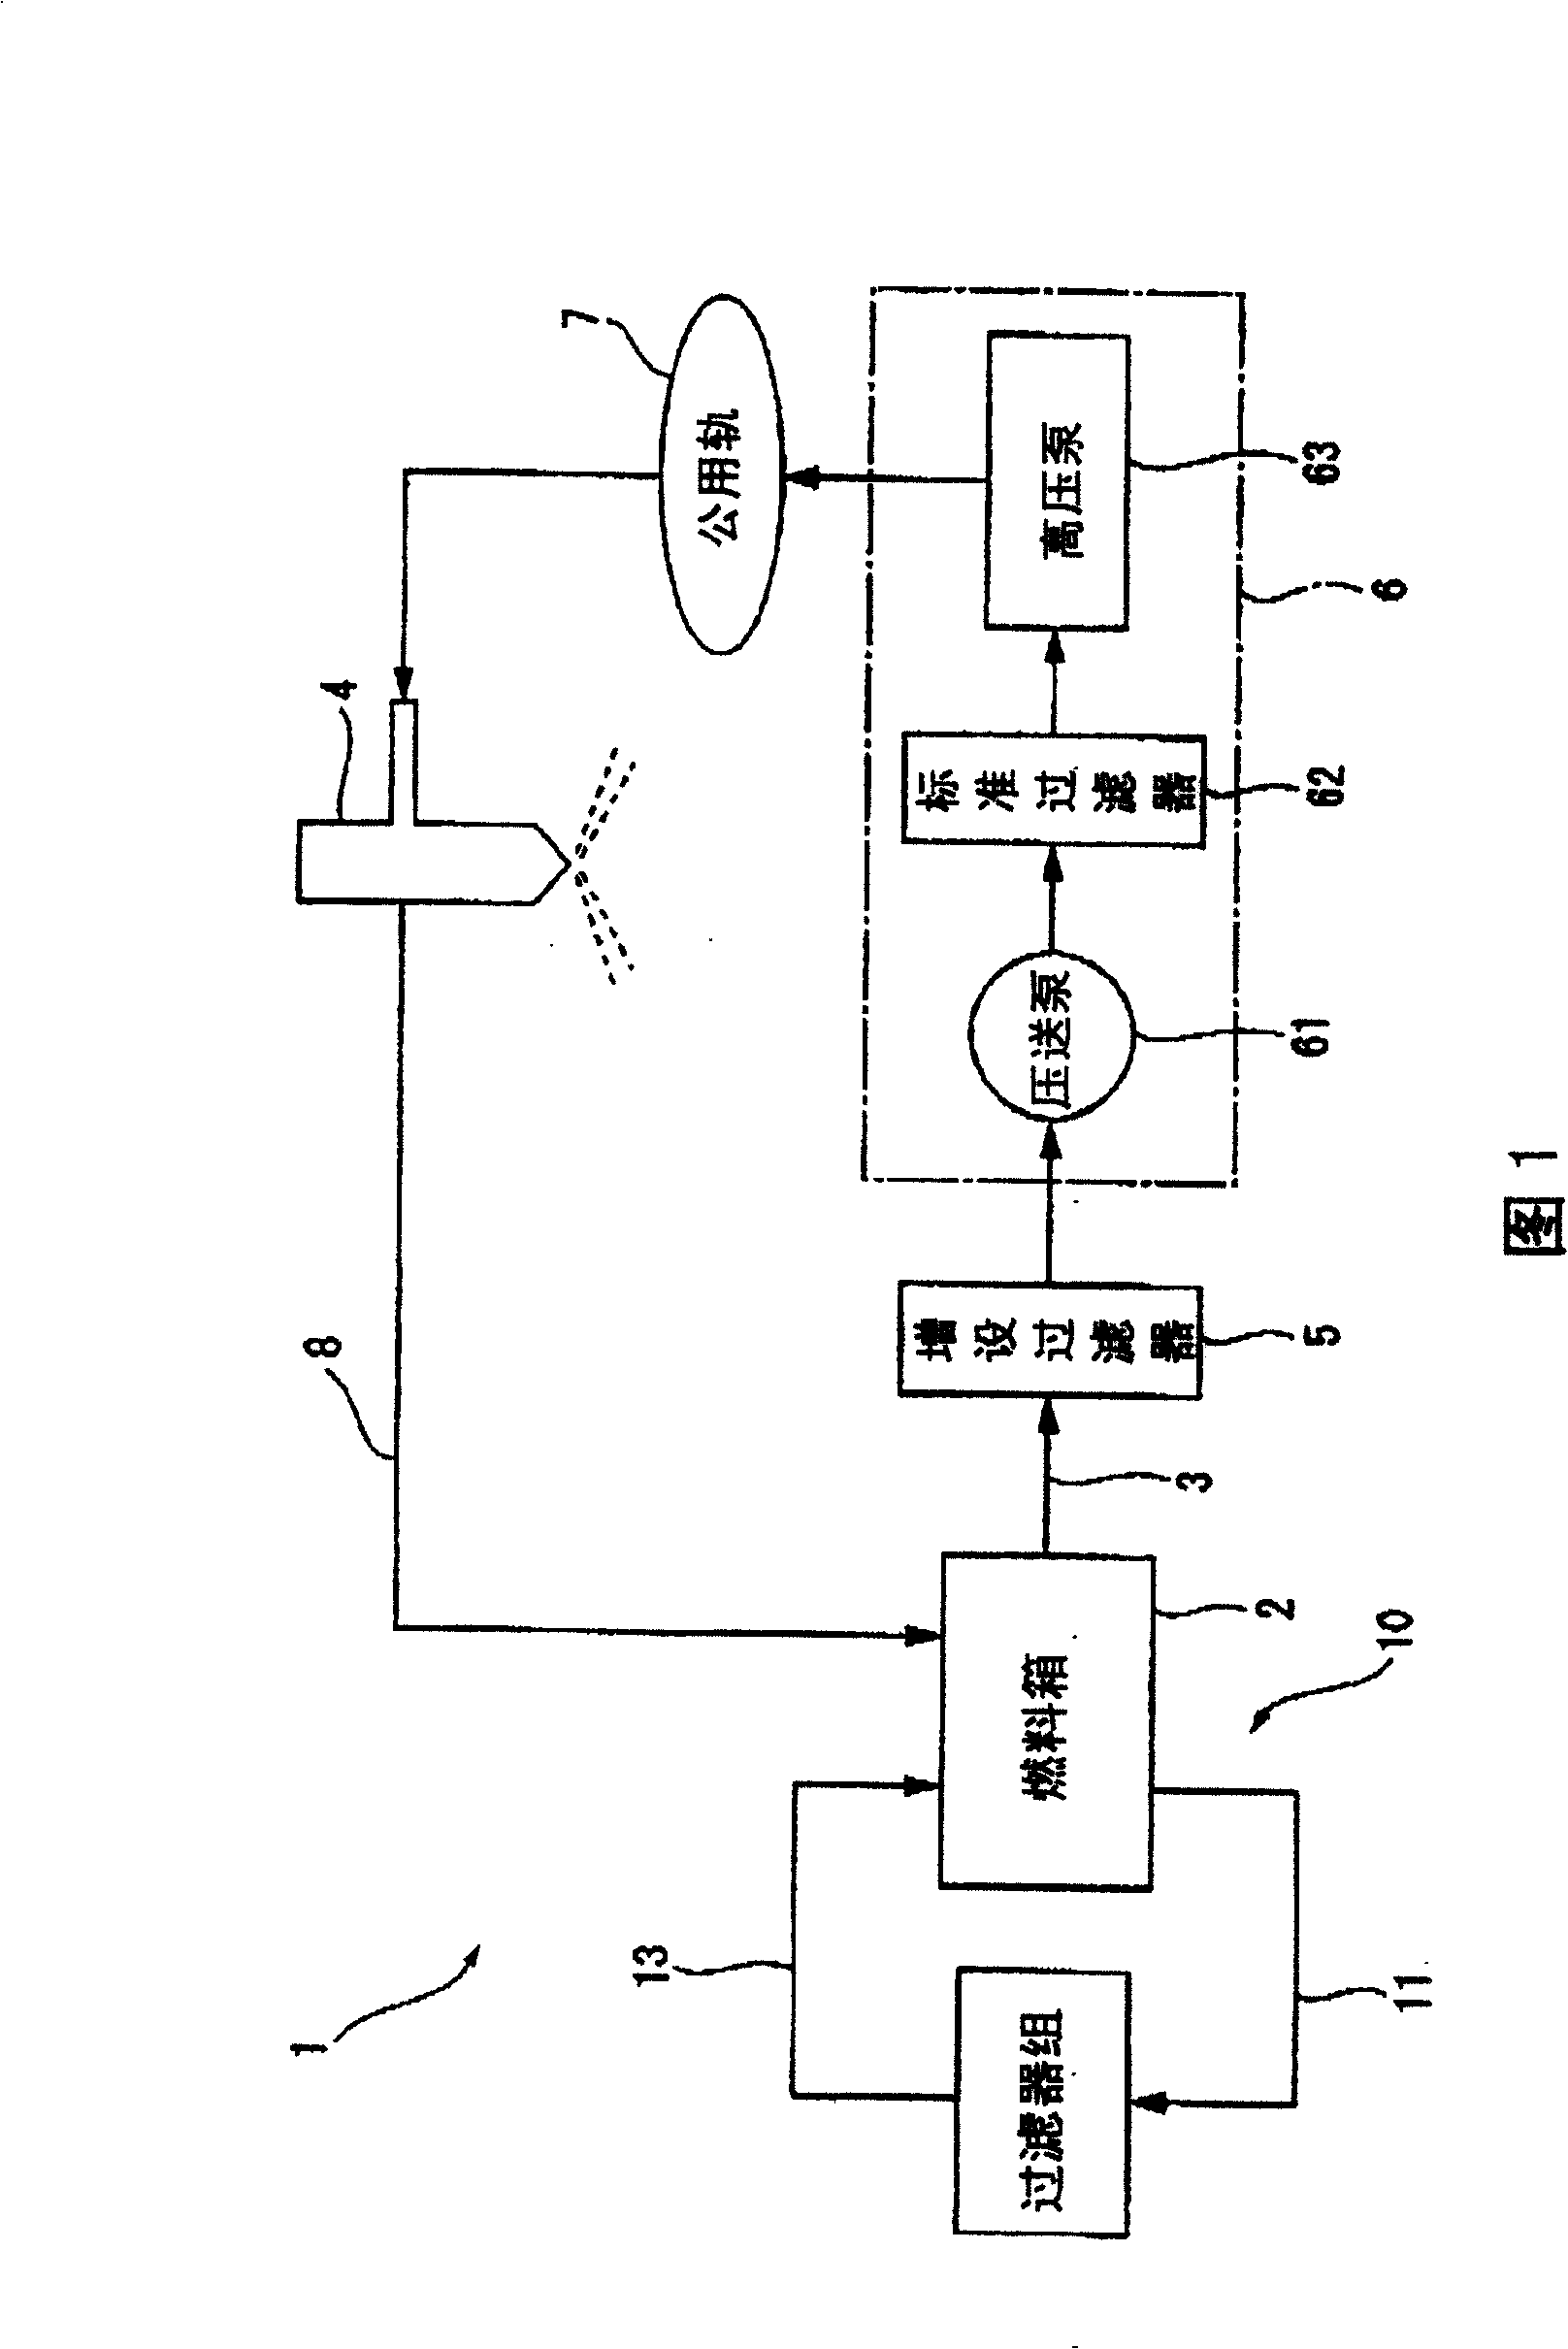 In-tank fuel purifying treatment apparatus